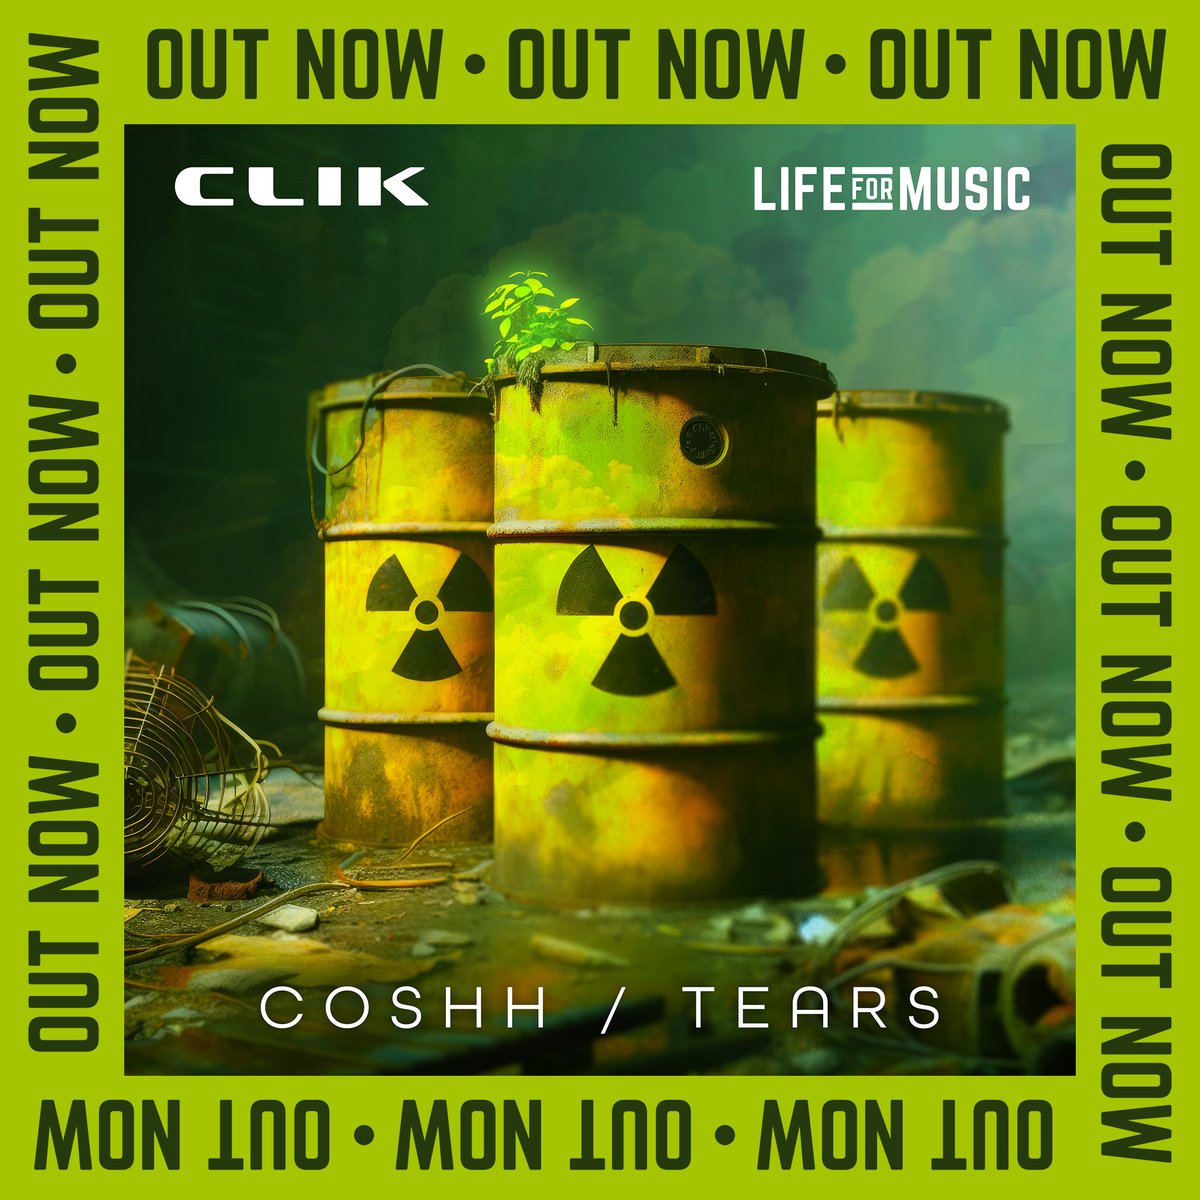 OUT NOW!!! NEW DNB)
ARTIST: CLIK
TRACK 1: COSHH
TRACK 2: TEARS
LABEL: LIFE FOR MUSIC
RELEASED: 26TH APRIL 2024
DEEP, EDGY DRUM & BASS
STREAM & DOWNLOAD : cygnusmusic.link/okwmeky
MORE INFO & LINKS:  linktr.ee/lifeformusic
#lifeformusic #drumandbass #newdnb